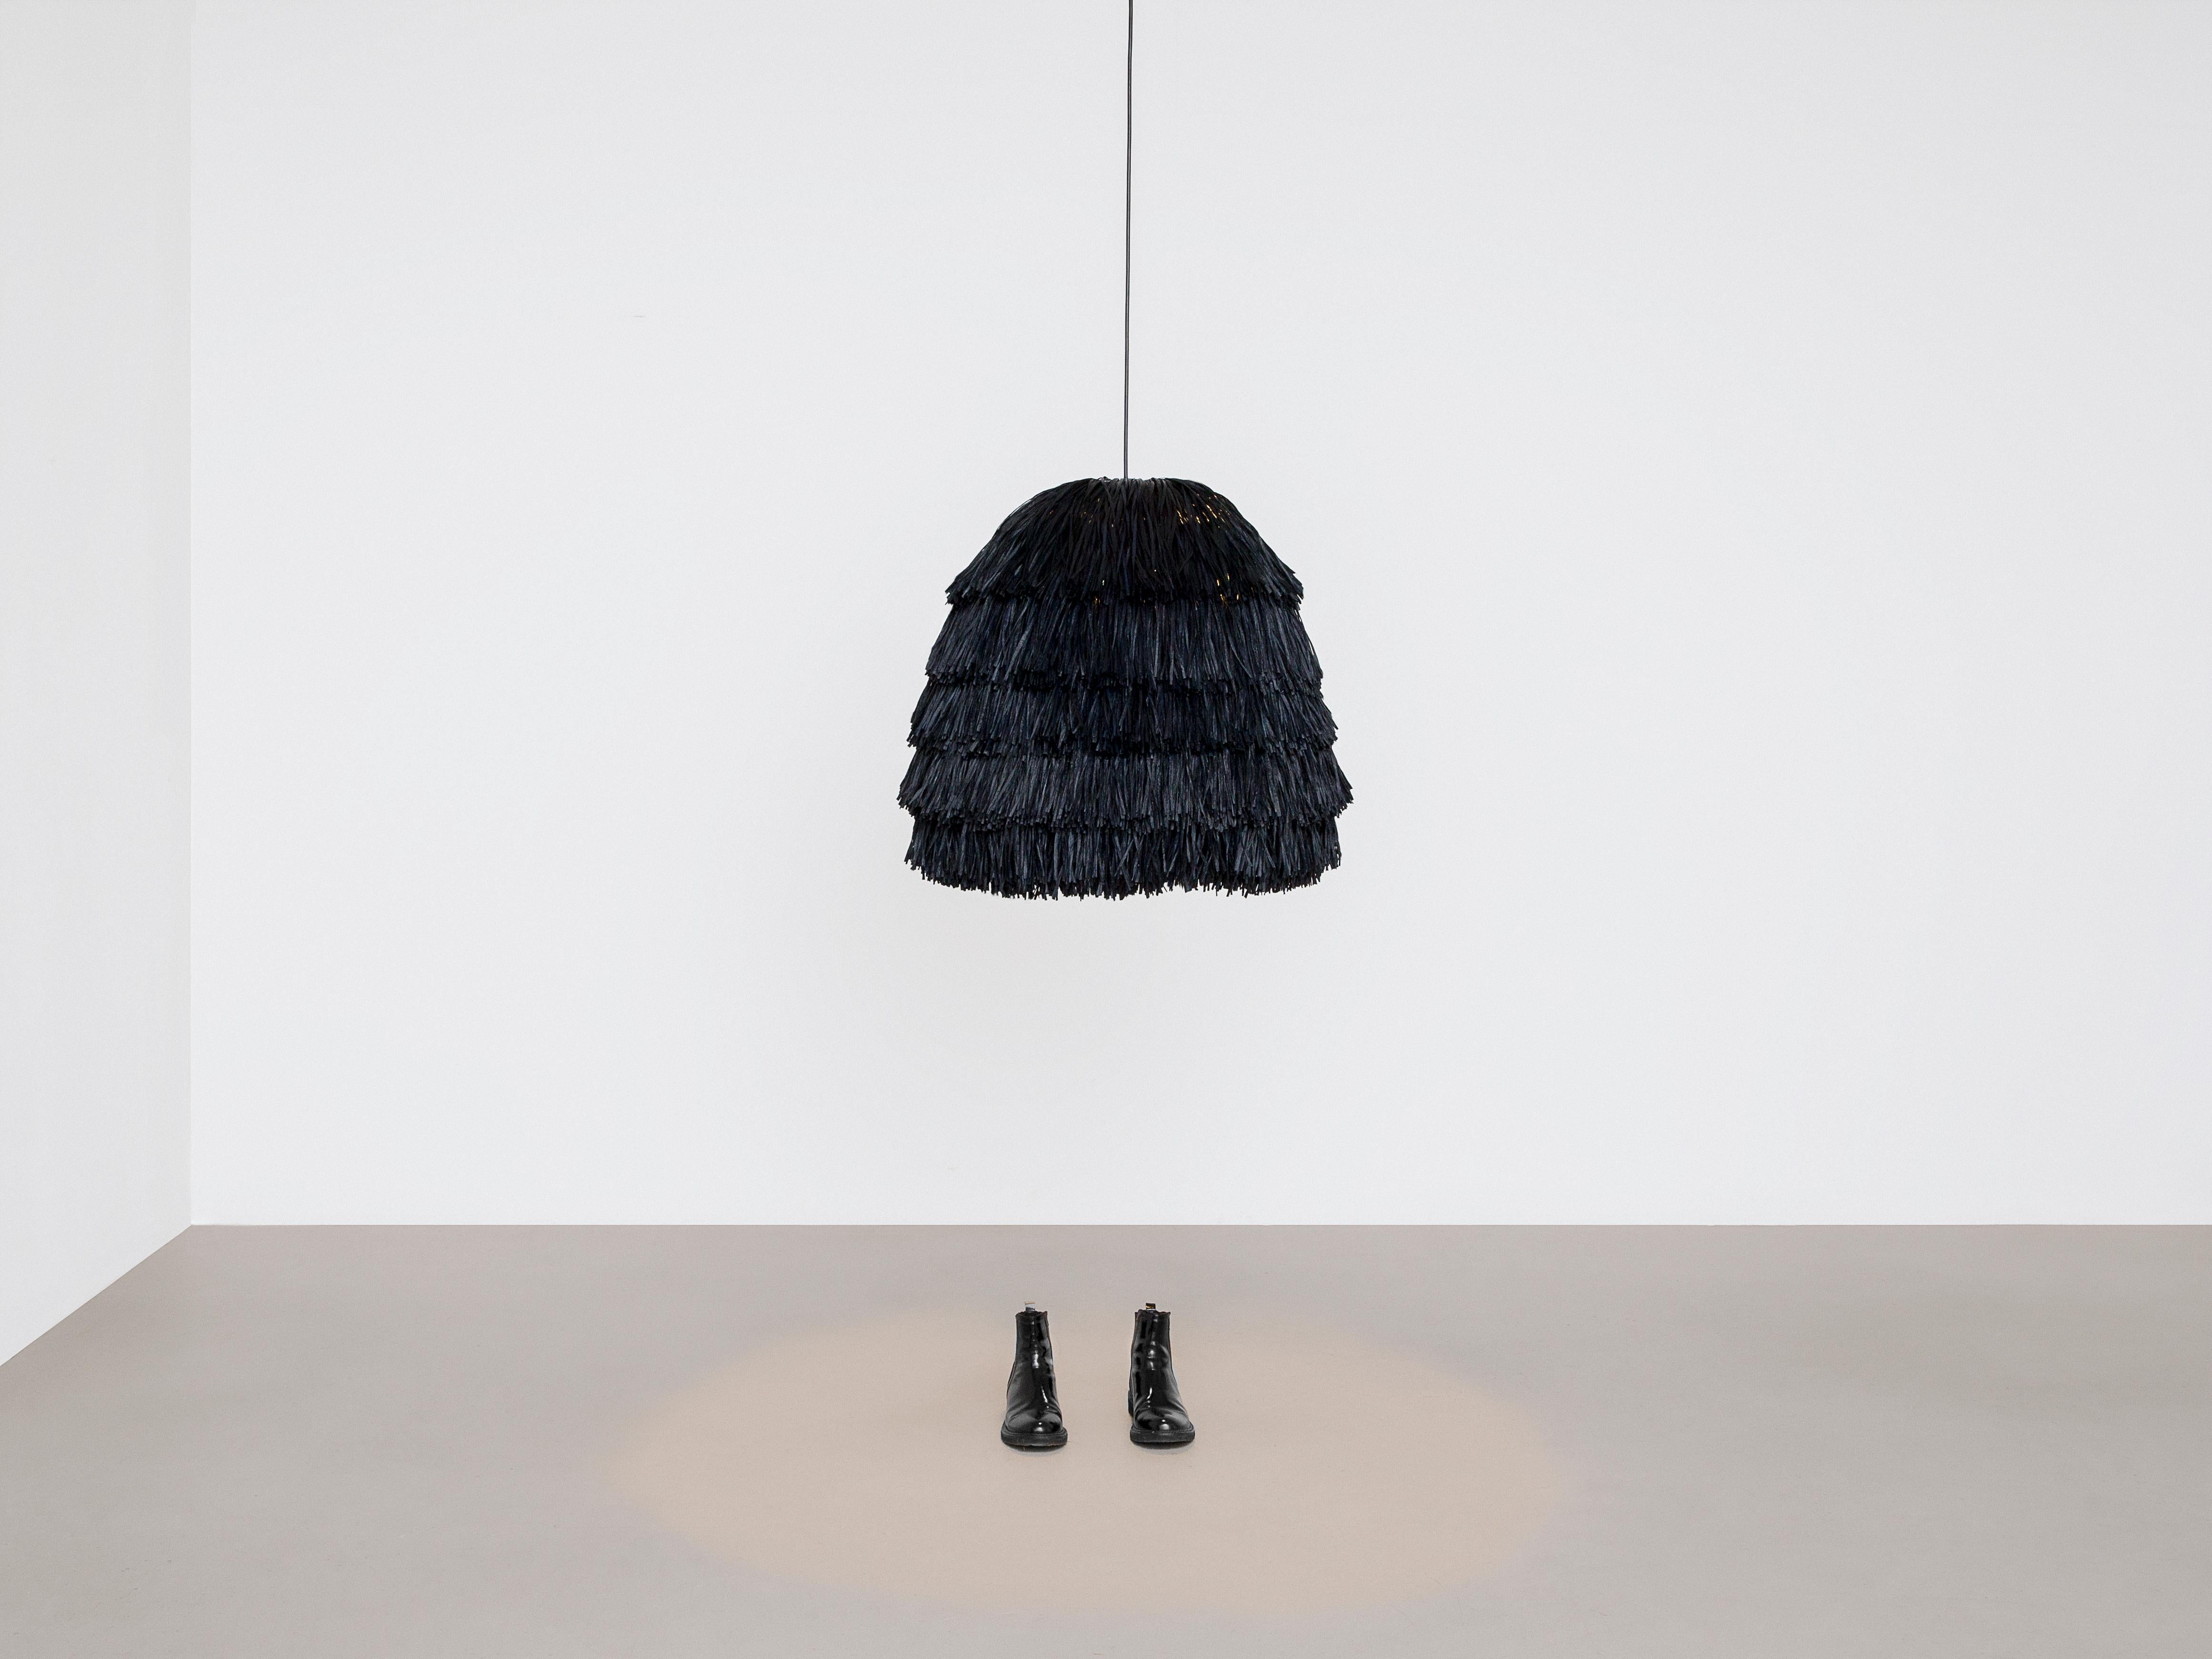 Fran L lamp by Llot Llov.
Handcrafted light object.
Dimensions: Ø 50 cm x H 45 cm.
Materials: raffia fringes.
Also available in green, red, black, beige.

With their bulky silhouette and rustling fringes, the fran lights are reminiscent of a